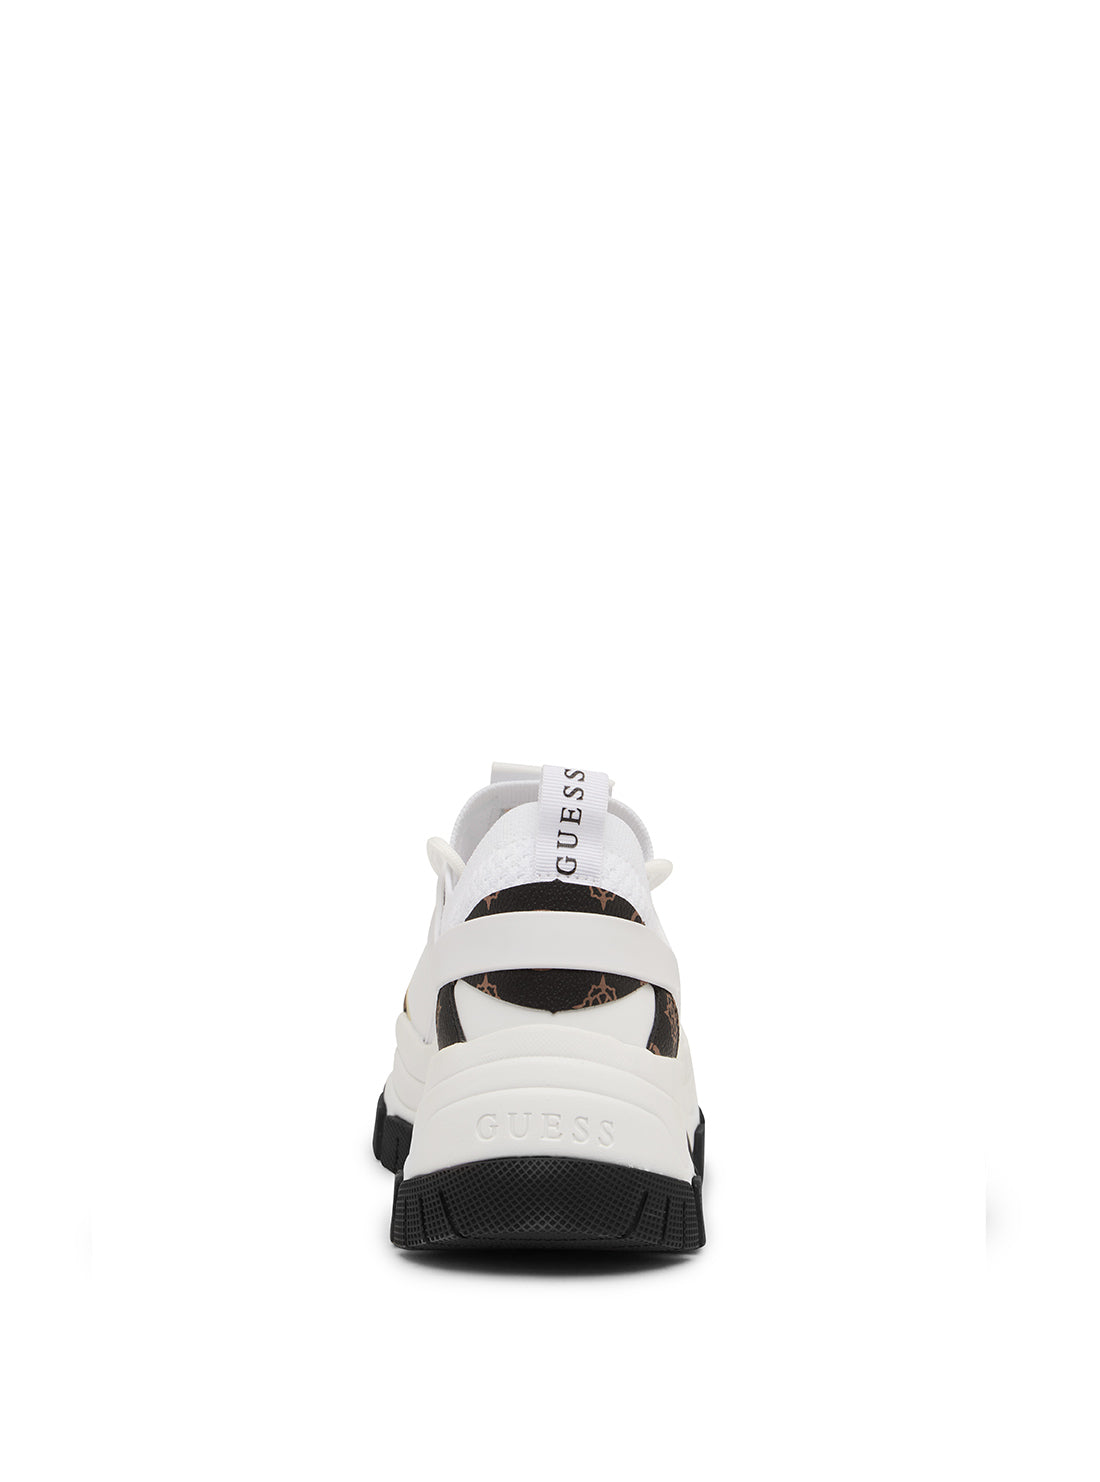 GUESS Women's White Braydin Low Top Sneakers BRAYDIN Back View